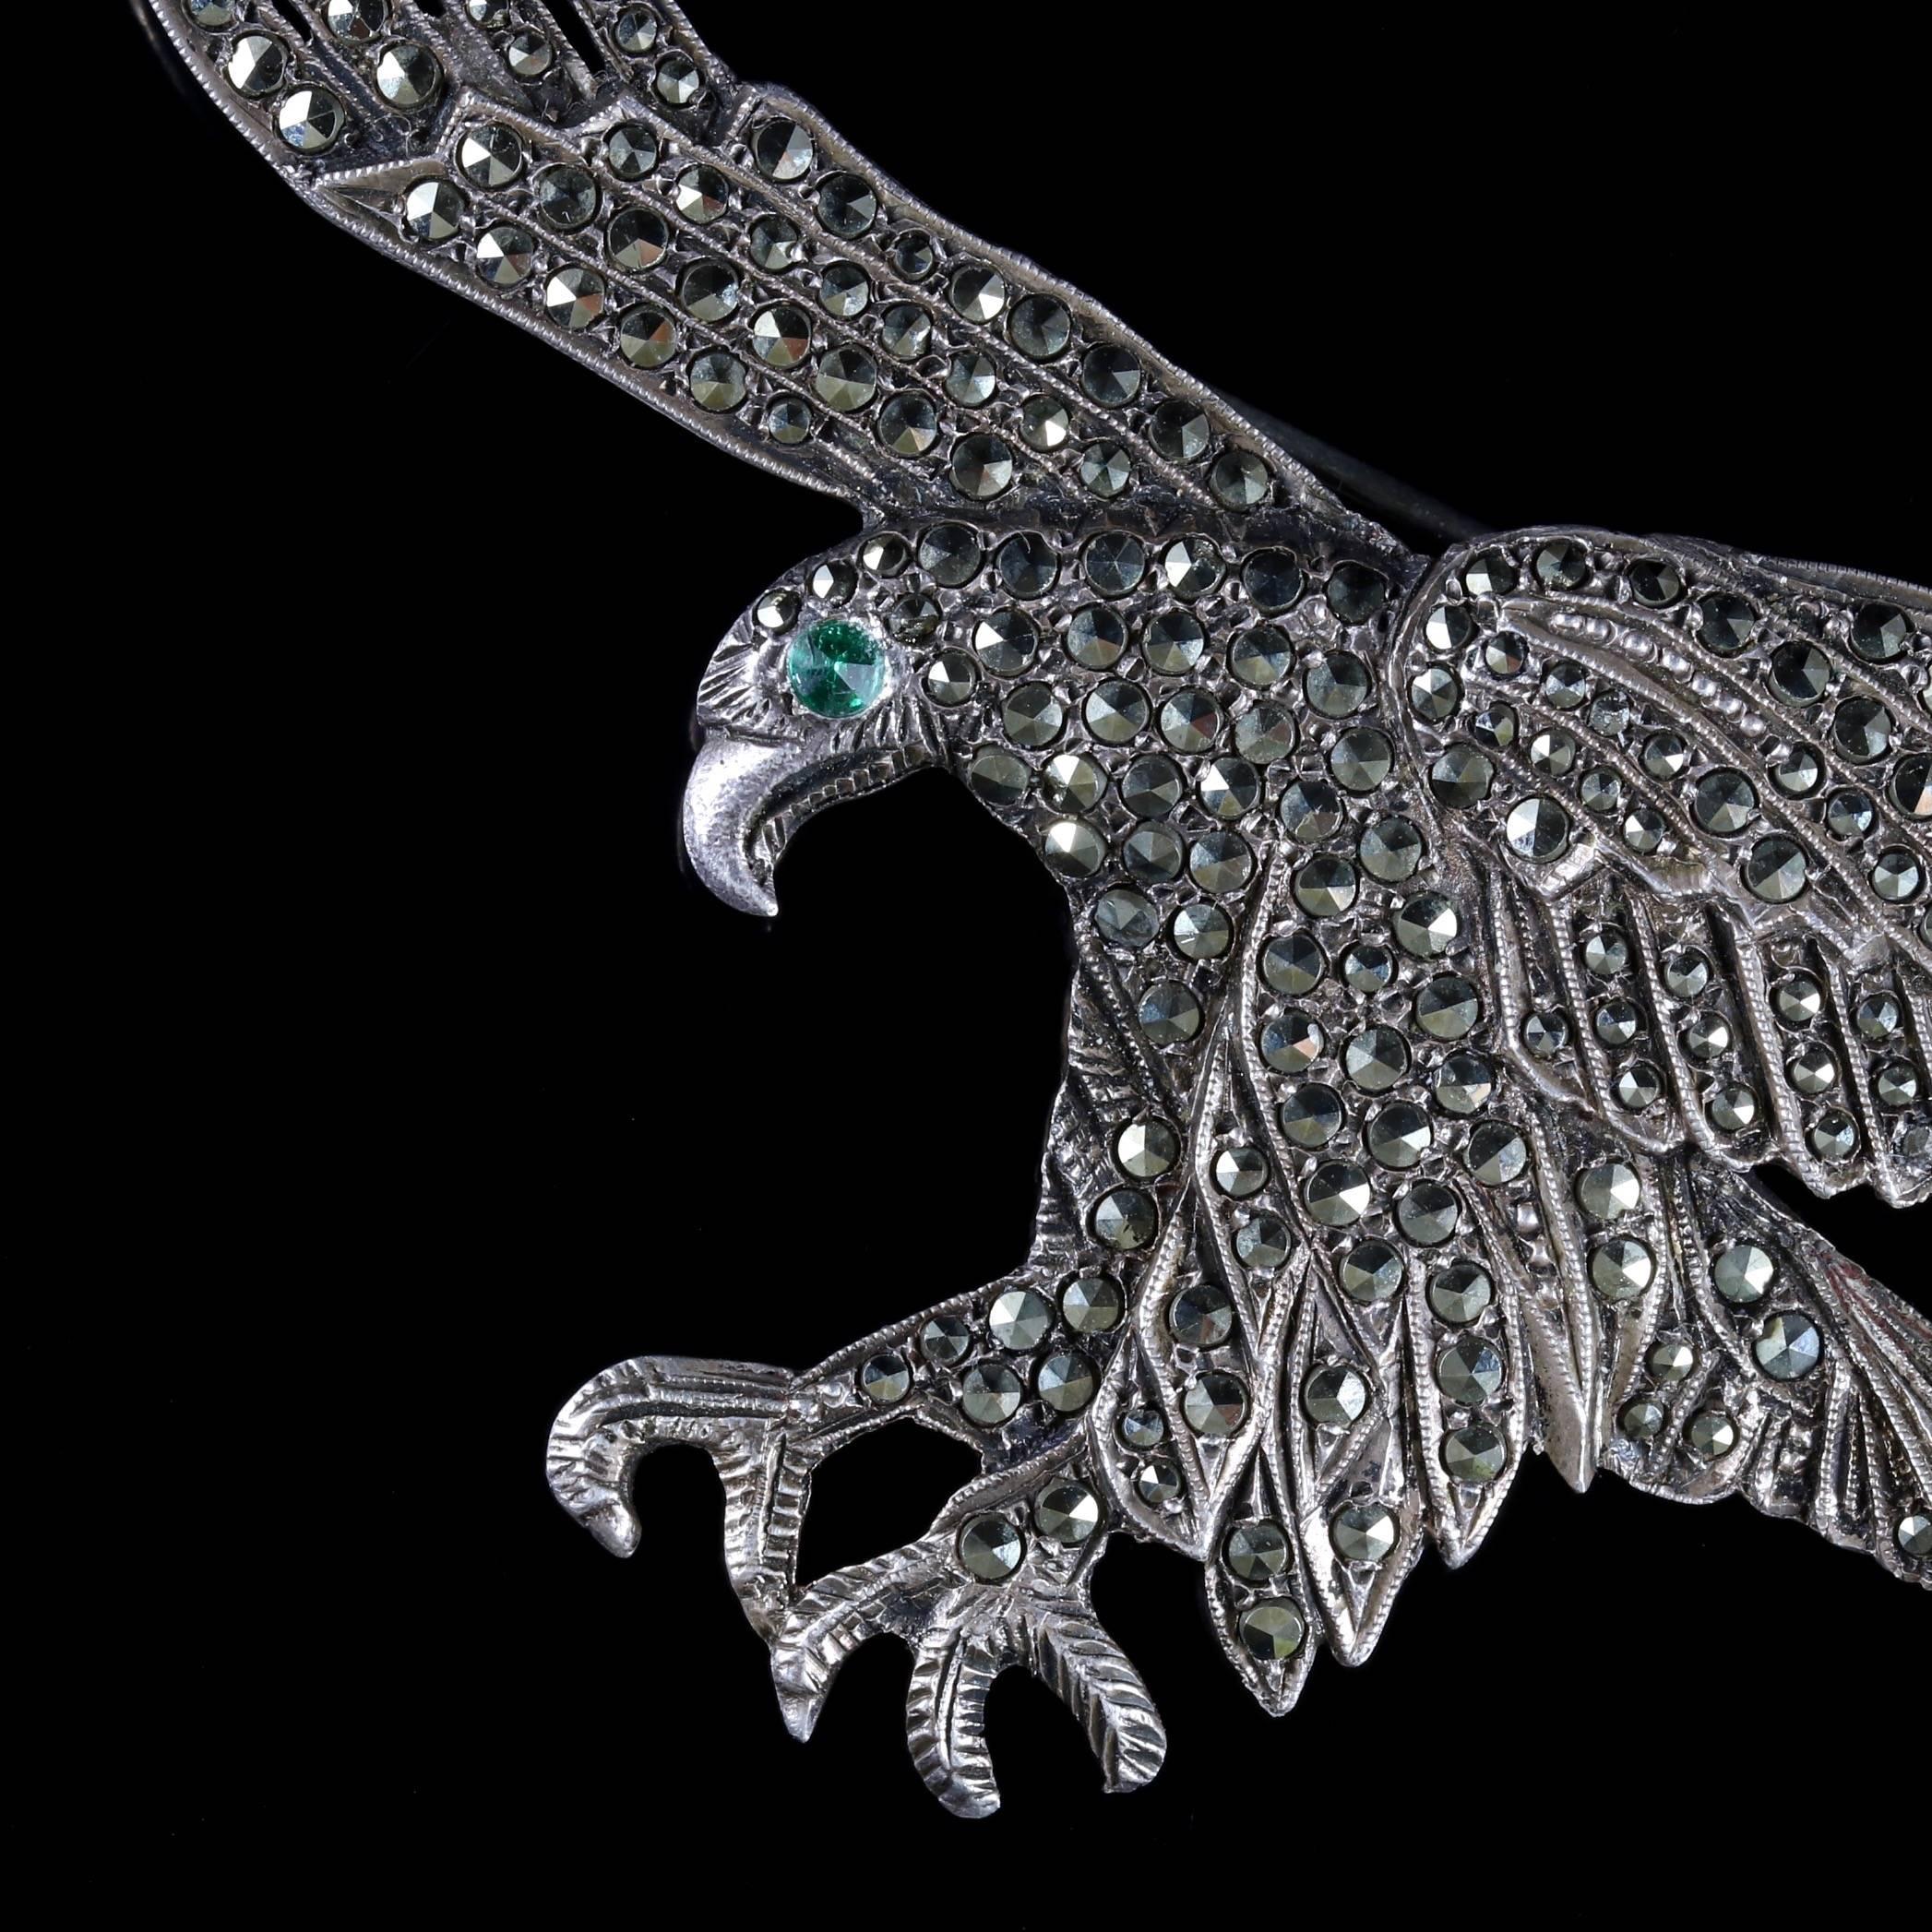 This beautiful large antique Silver Victorian Eagle brooch is Circa 1900. 

The Eagles depicted wings are outstretched and decorated in sparkling Cut Steel studs with a green Paste eye. 

Cut-steel jewellery is set with faceted and polished steel